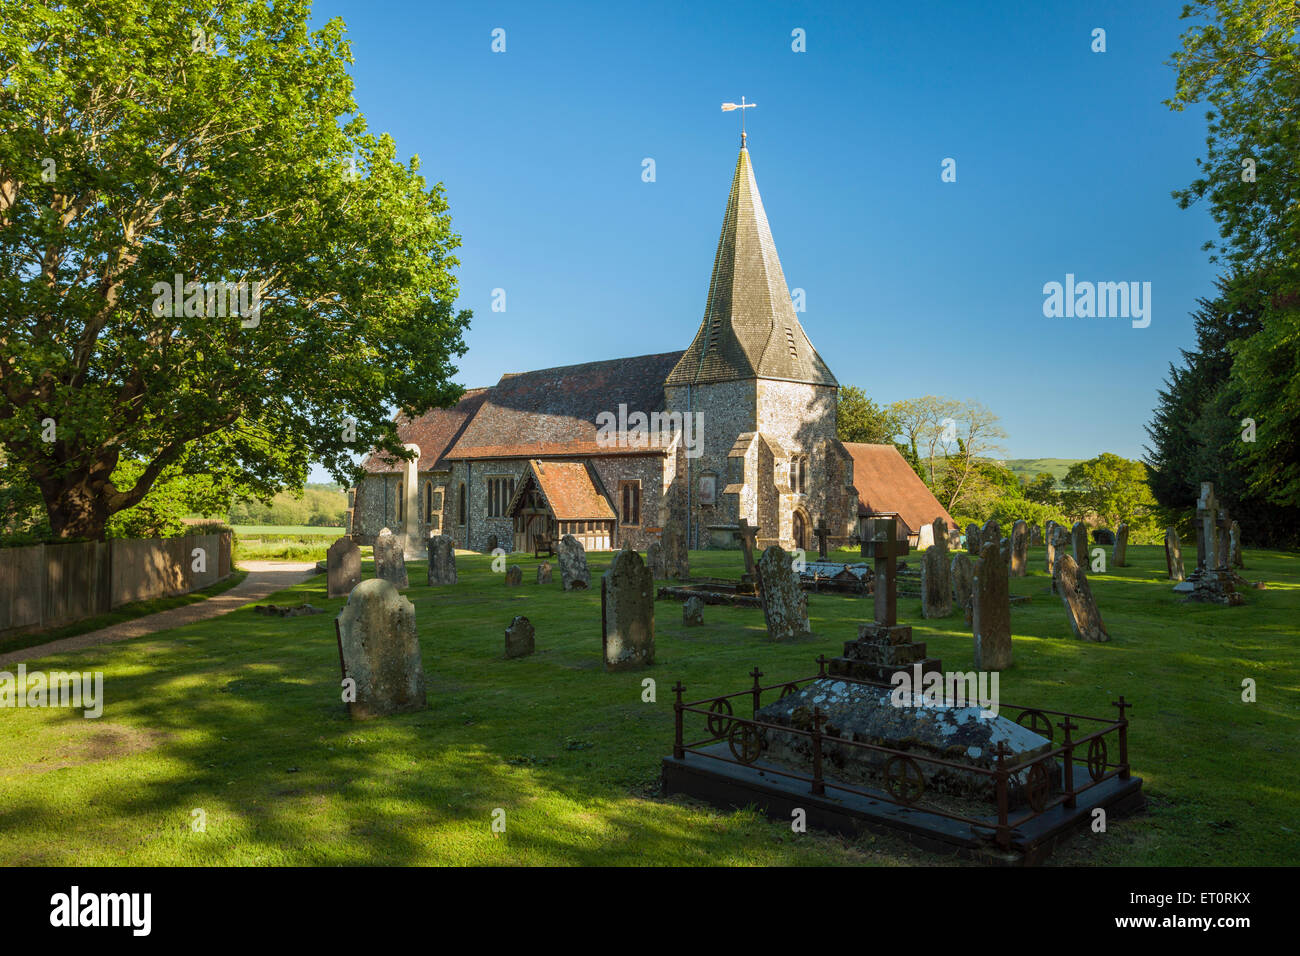 L'église St Mary à Barcombe, East Sussex, Angleterre. Banque D'Images